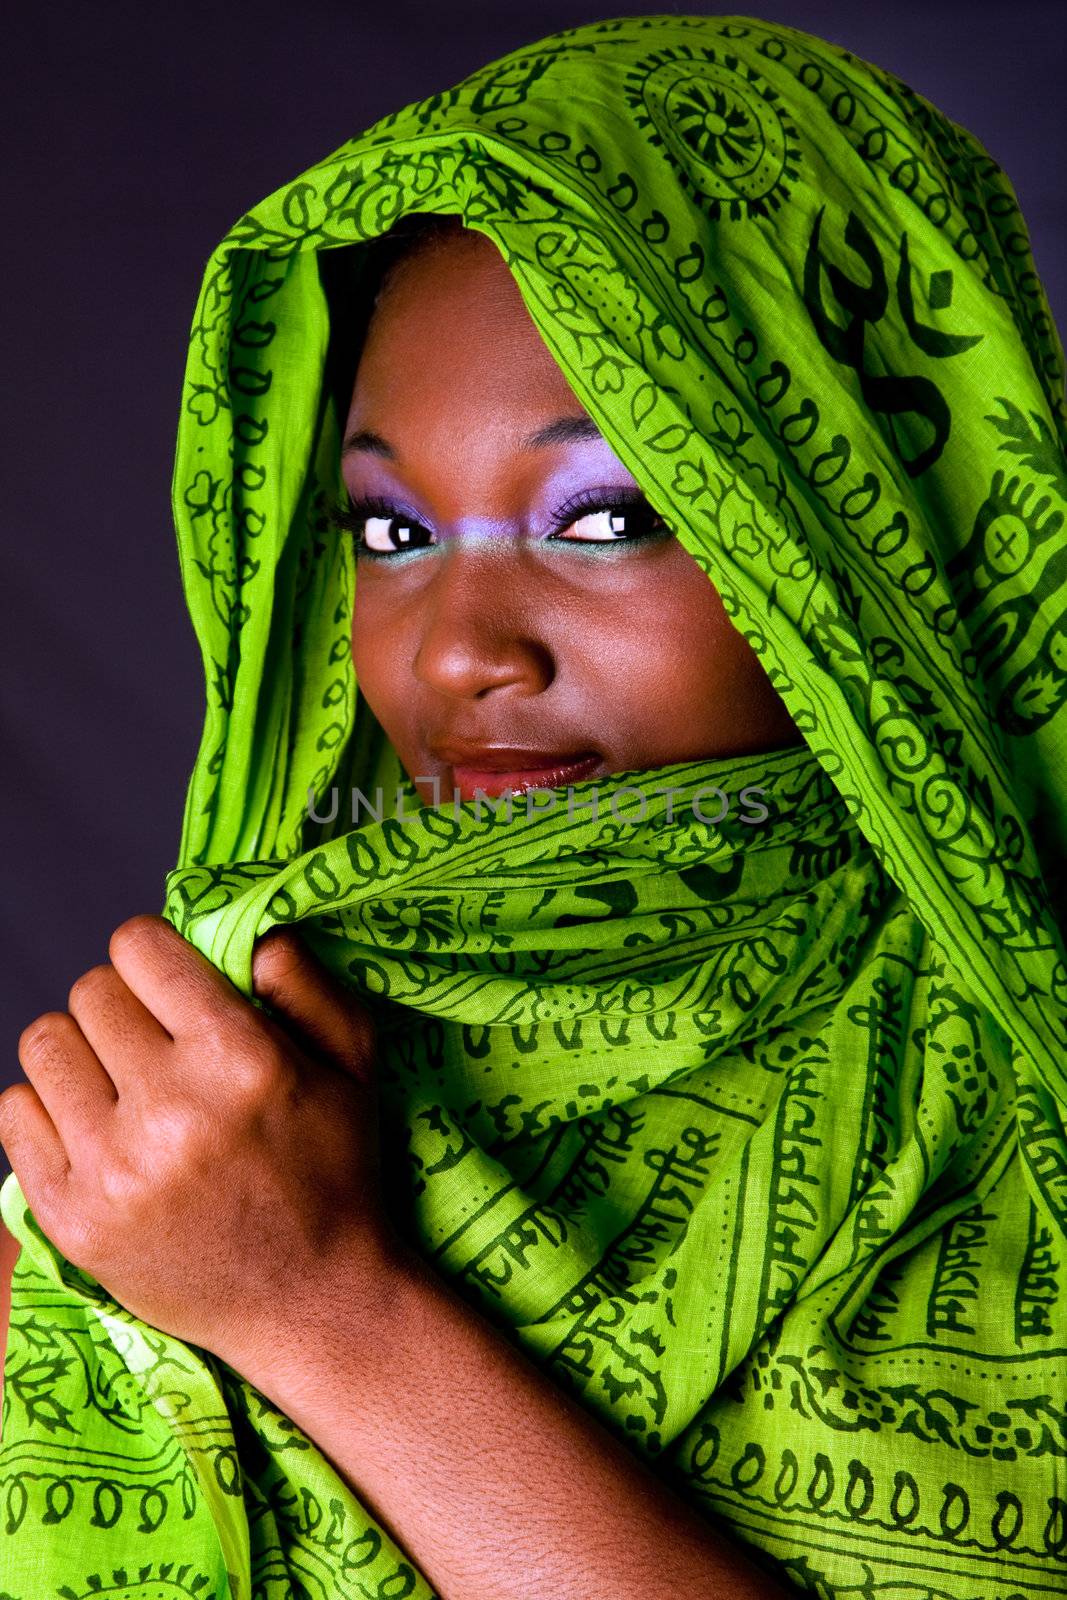 The face of an shy innocent beautiful young African-American woman covering her mouth with green headwrap and purple-green makeup, isolated